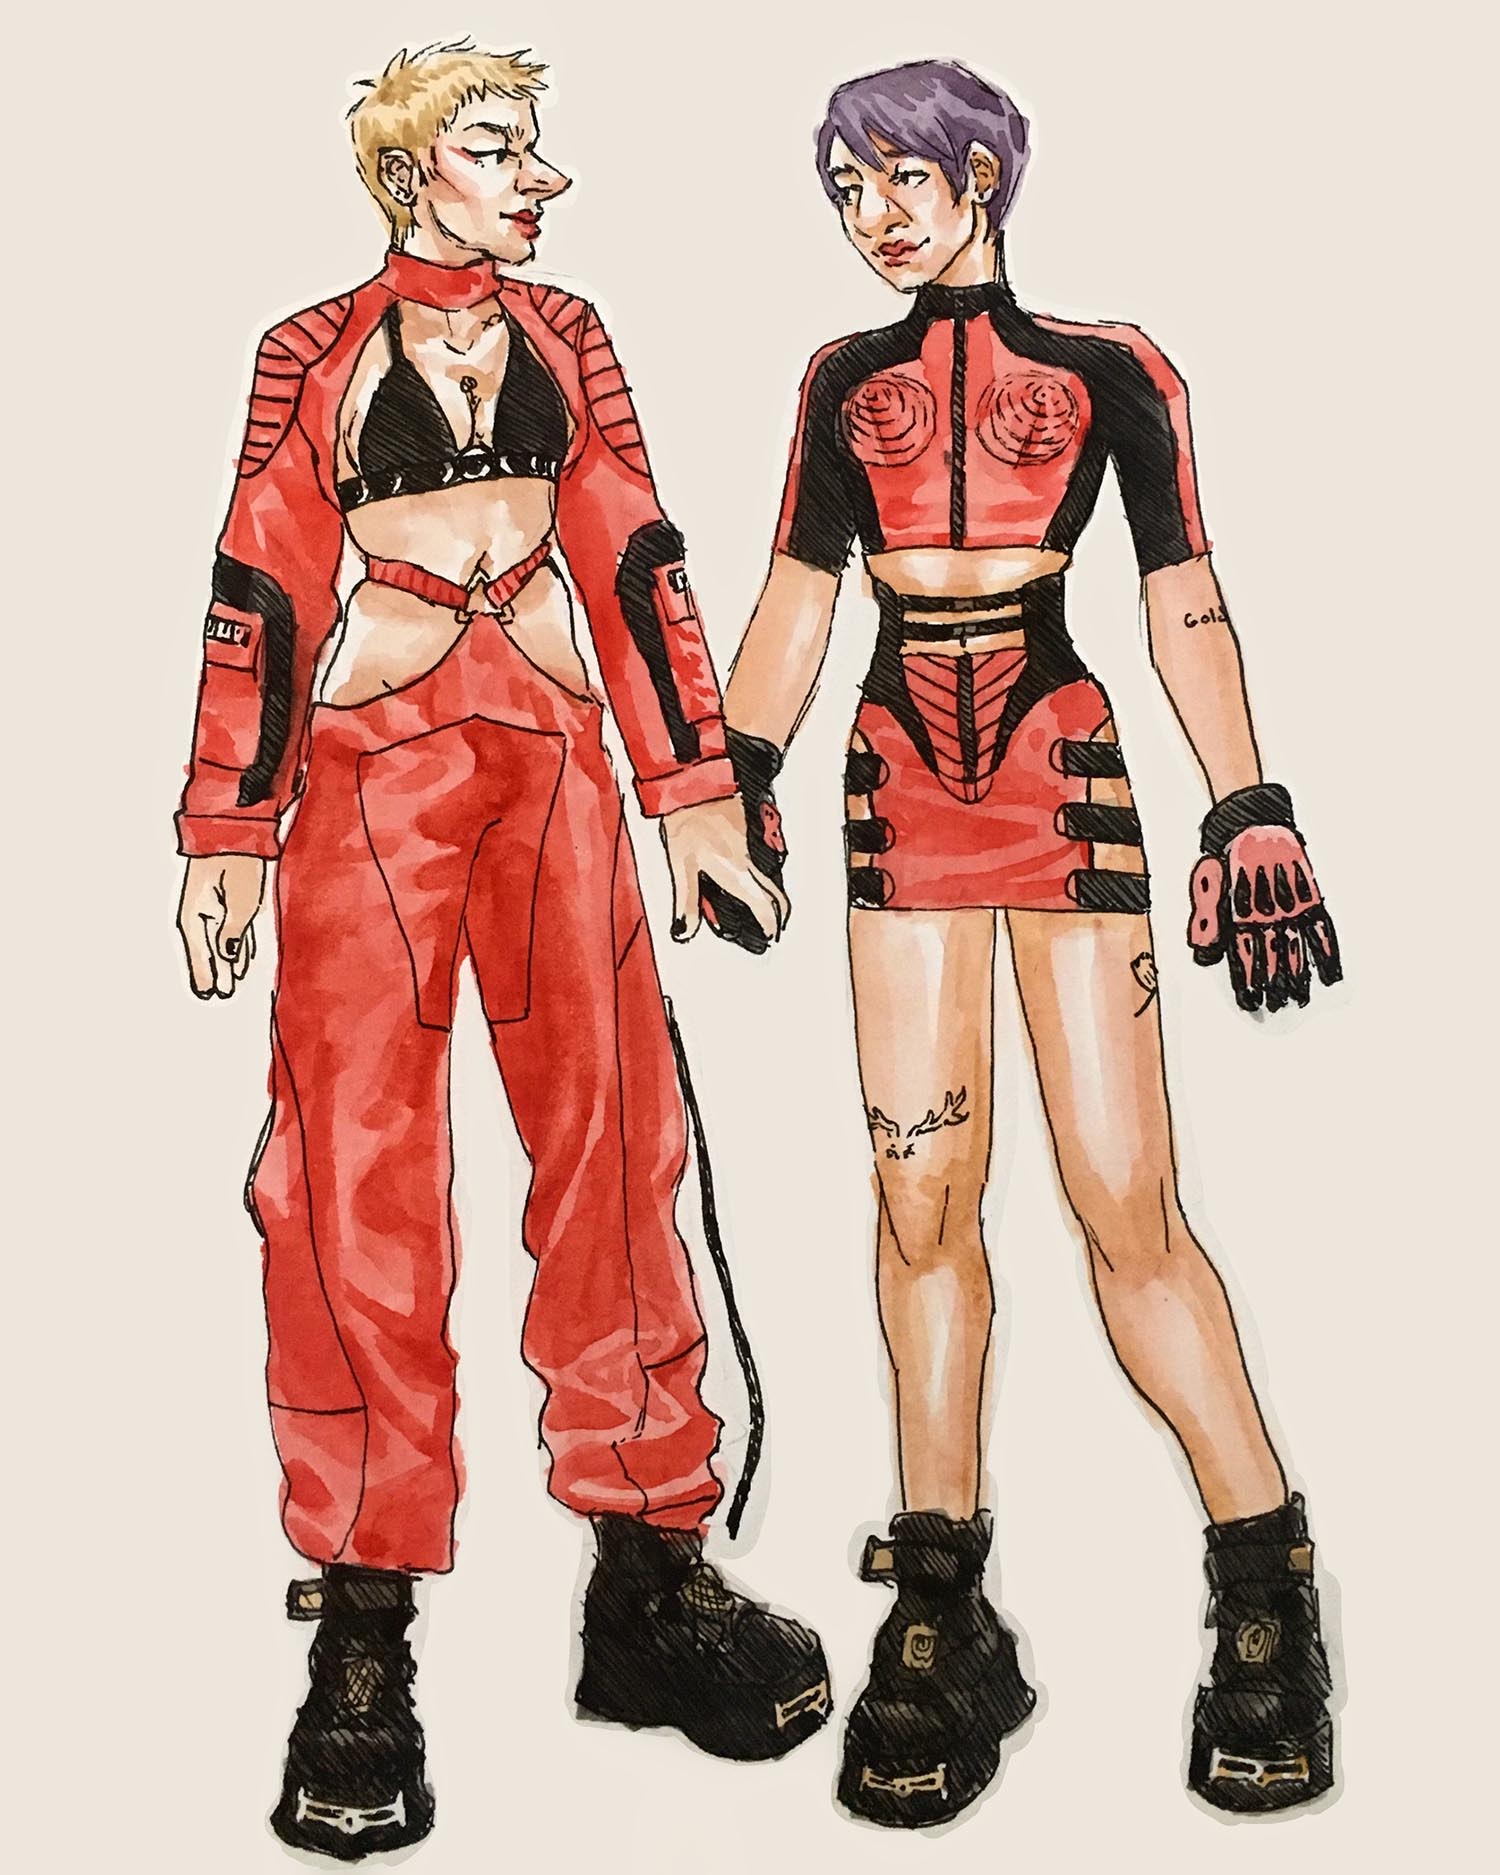 two feminine figures holding hands wearing clothes similar to a racecar driver. left (jupiter): blonde in black bikini top with red latex-ey bolero and baggy pants. right (chip): purple haired in spandex biker top with cone breasts and fitted miniskirt with red panels and black straps, hockey gloves. both wear black platform sneakers